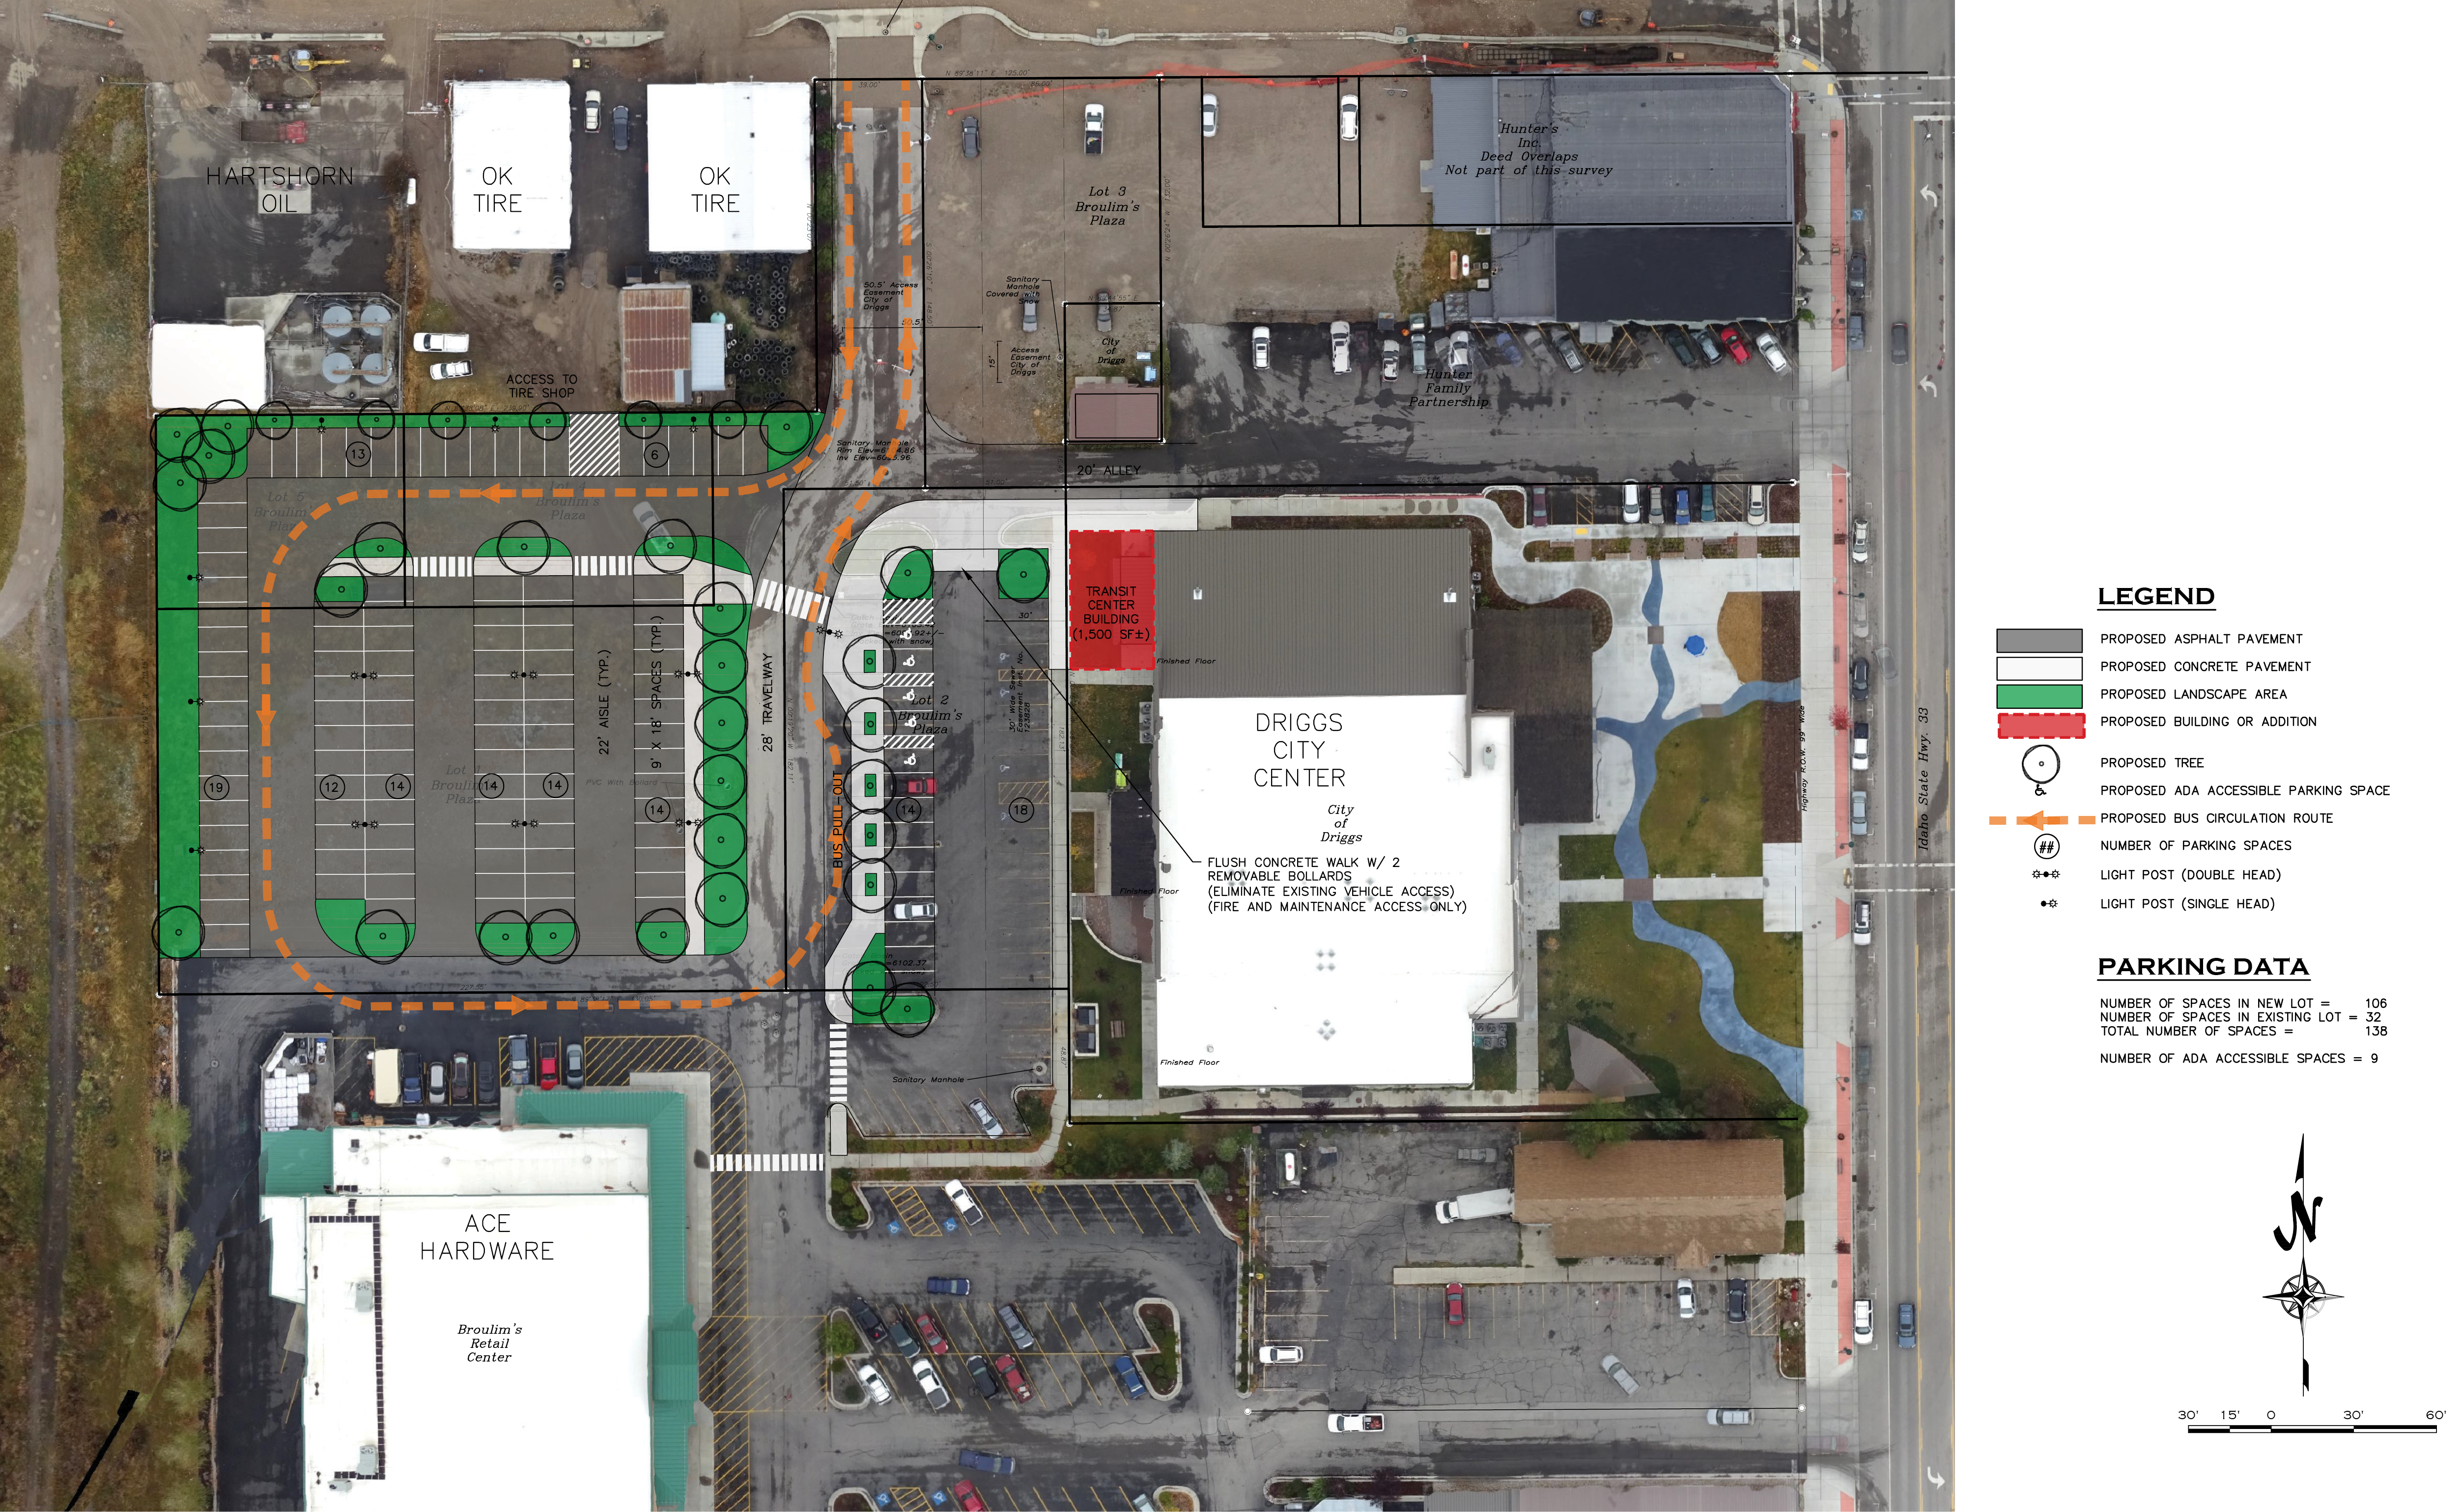 Schematic showing new parking lot west of the Driggs City Center and north of Ace Hardware.